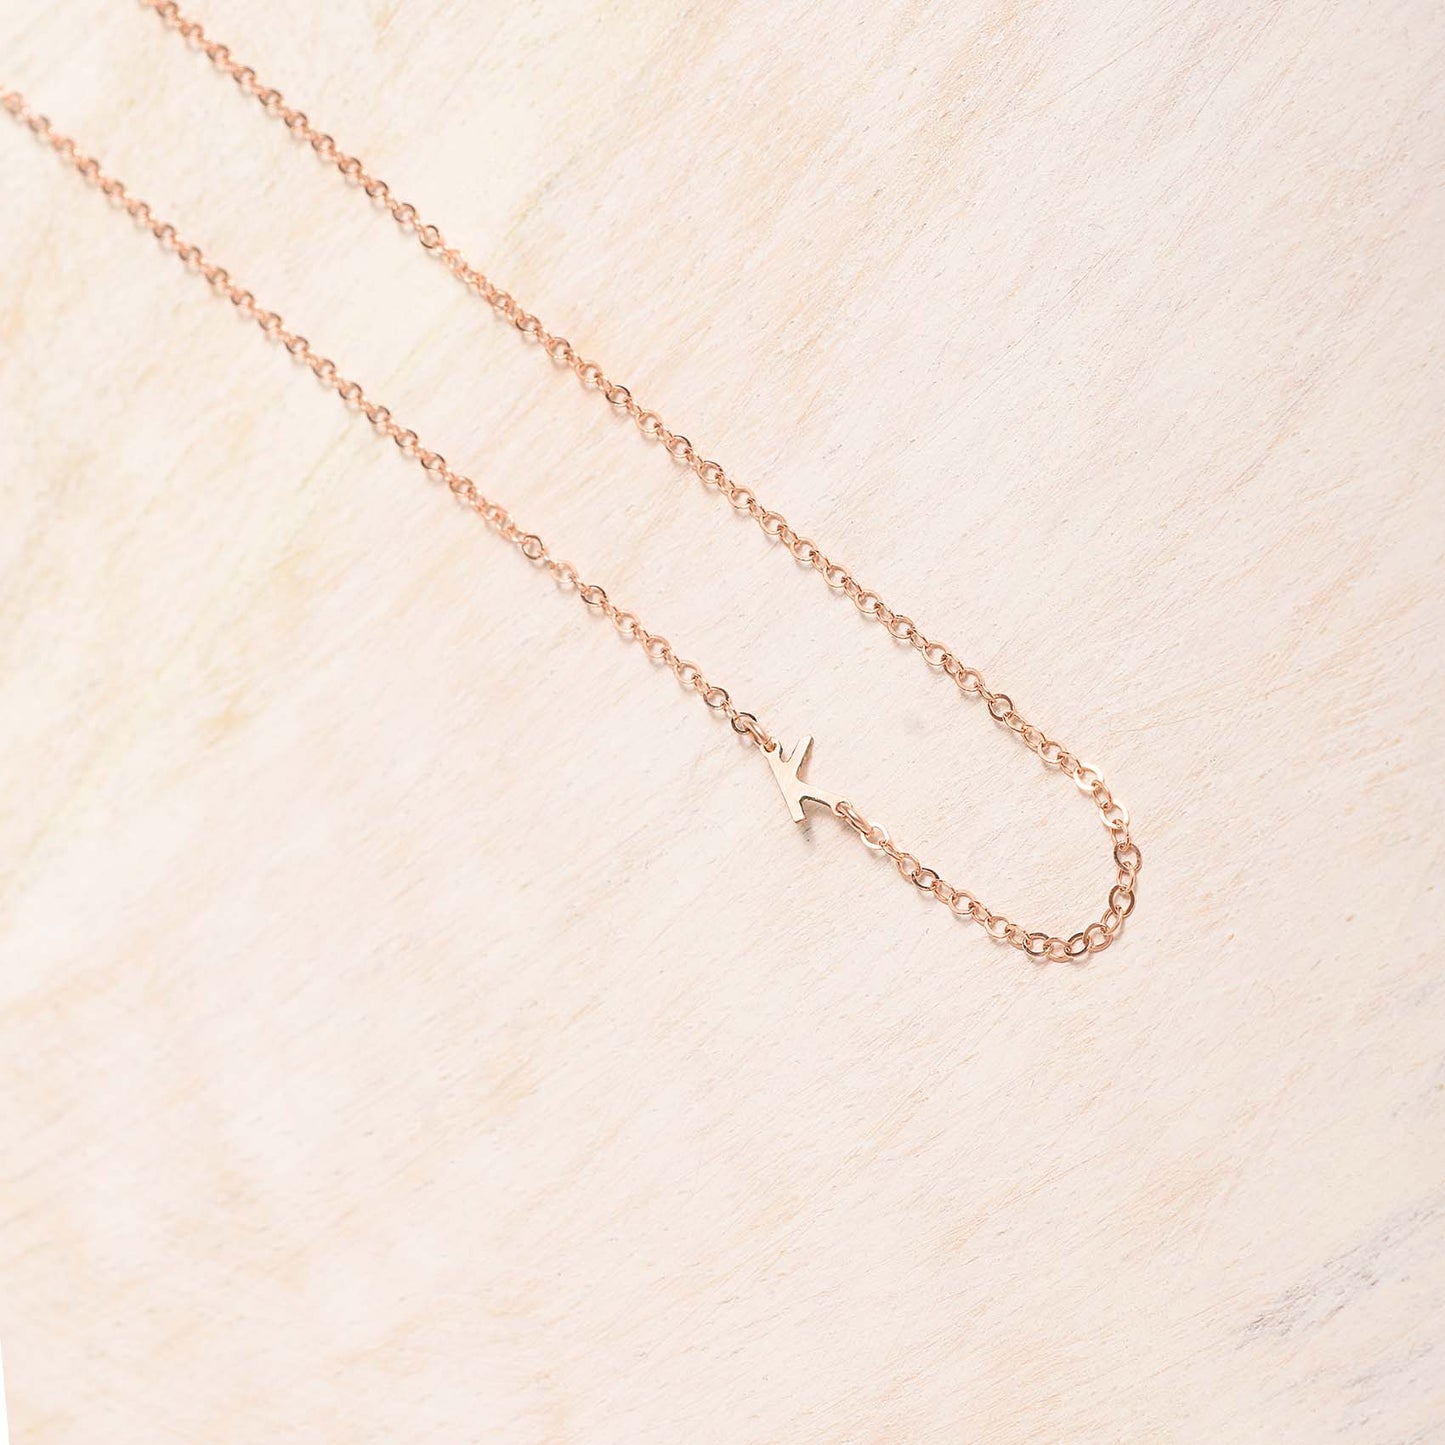 Example of Rose Gold-Filled Link Necklace 